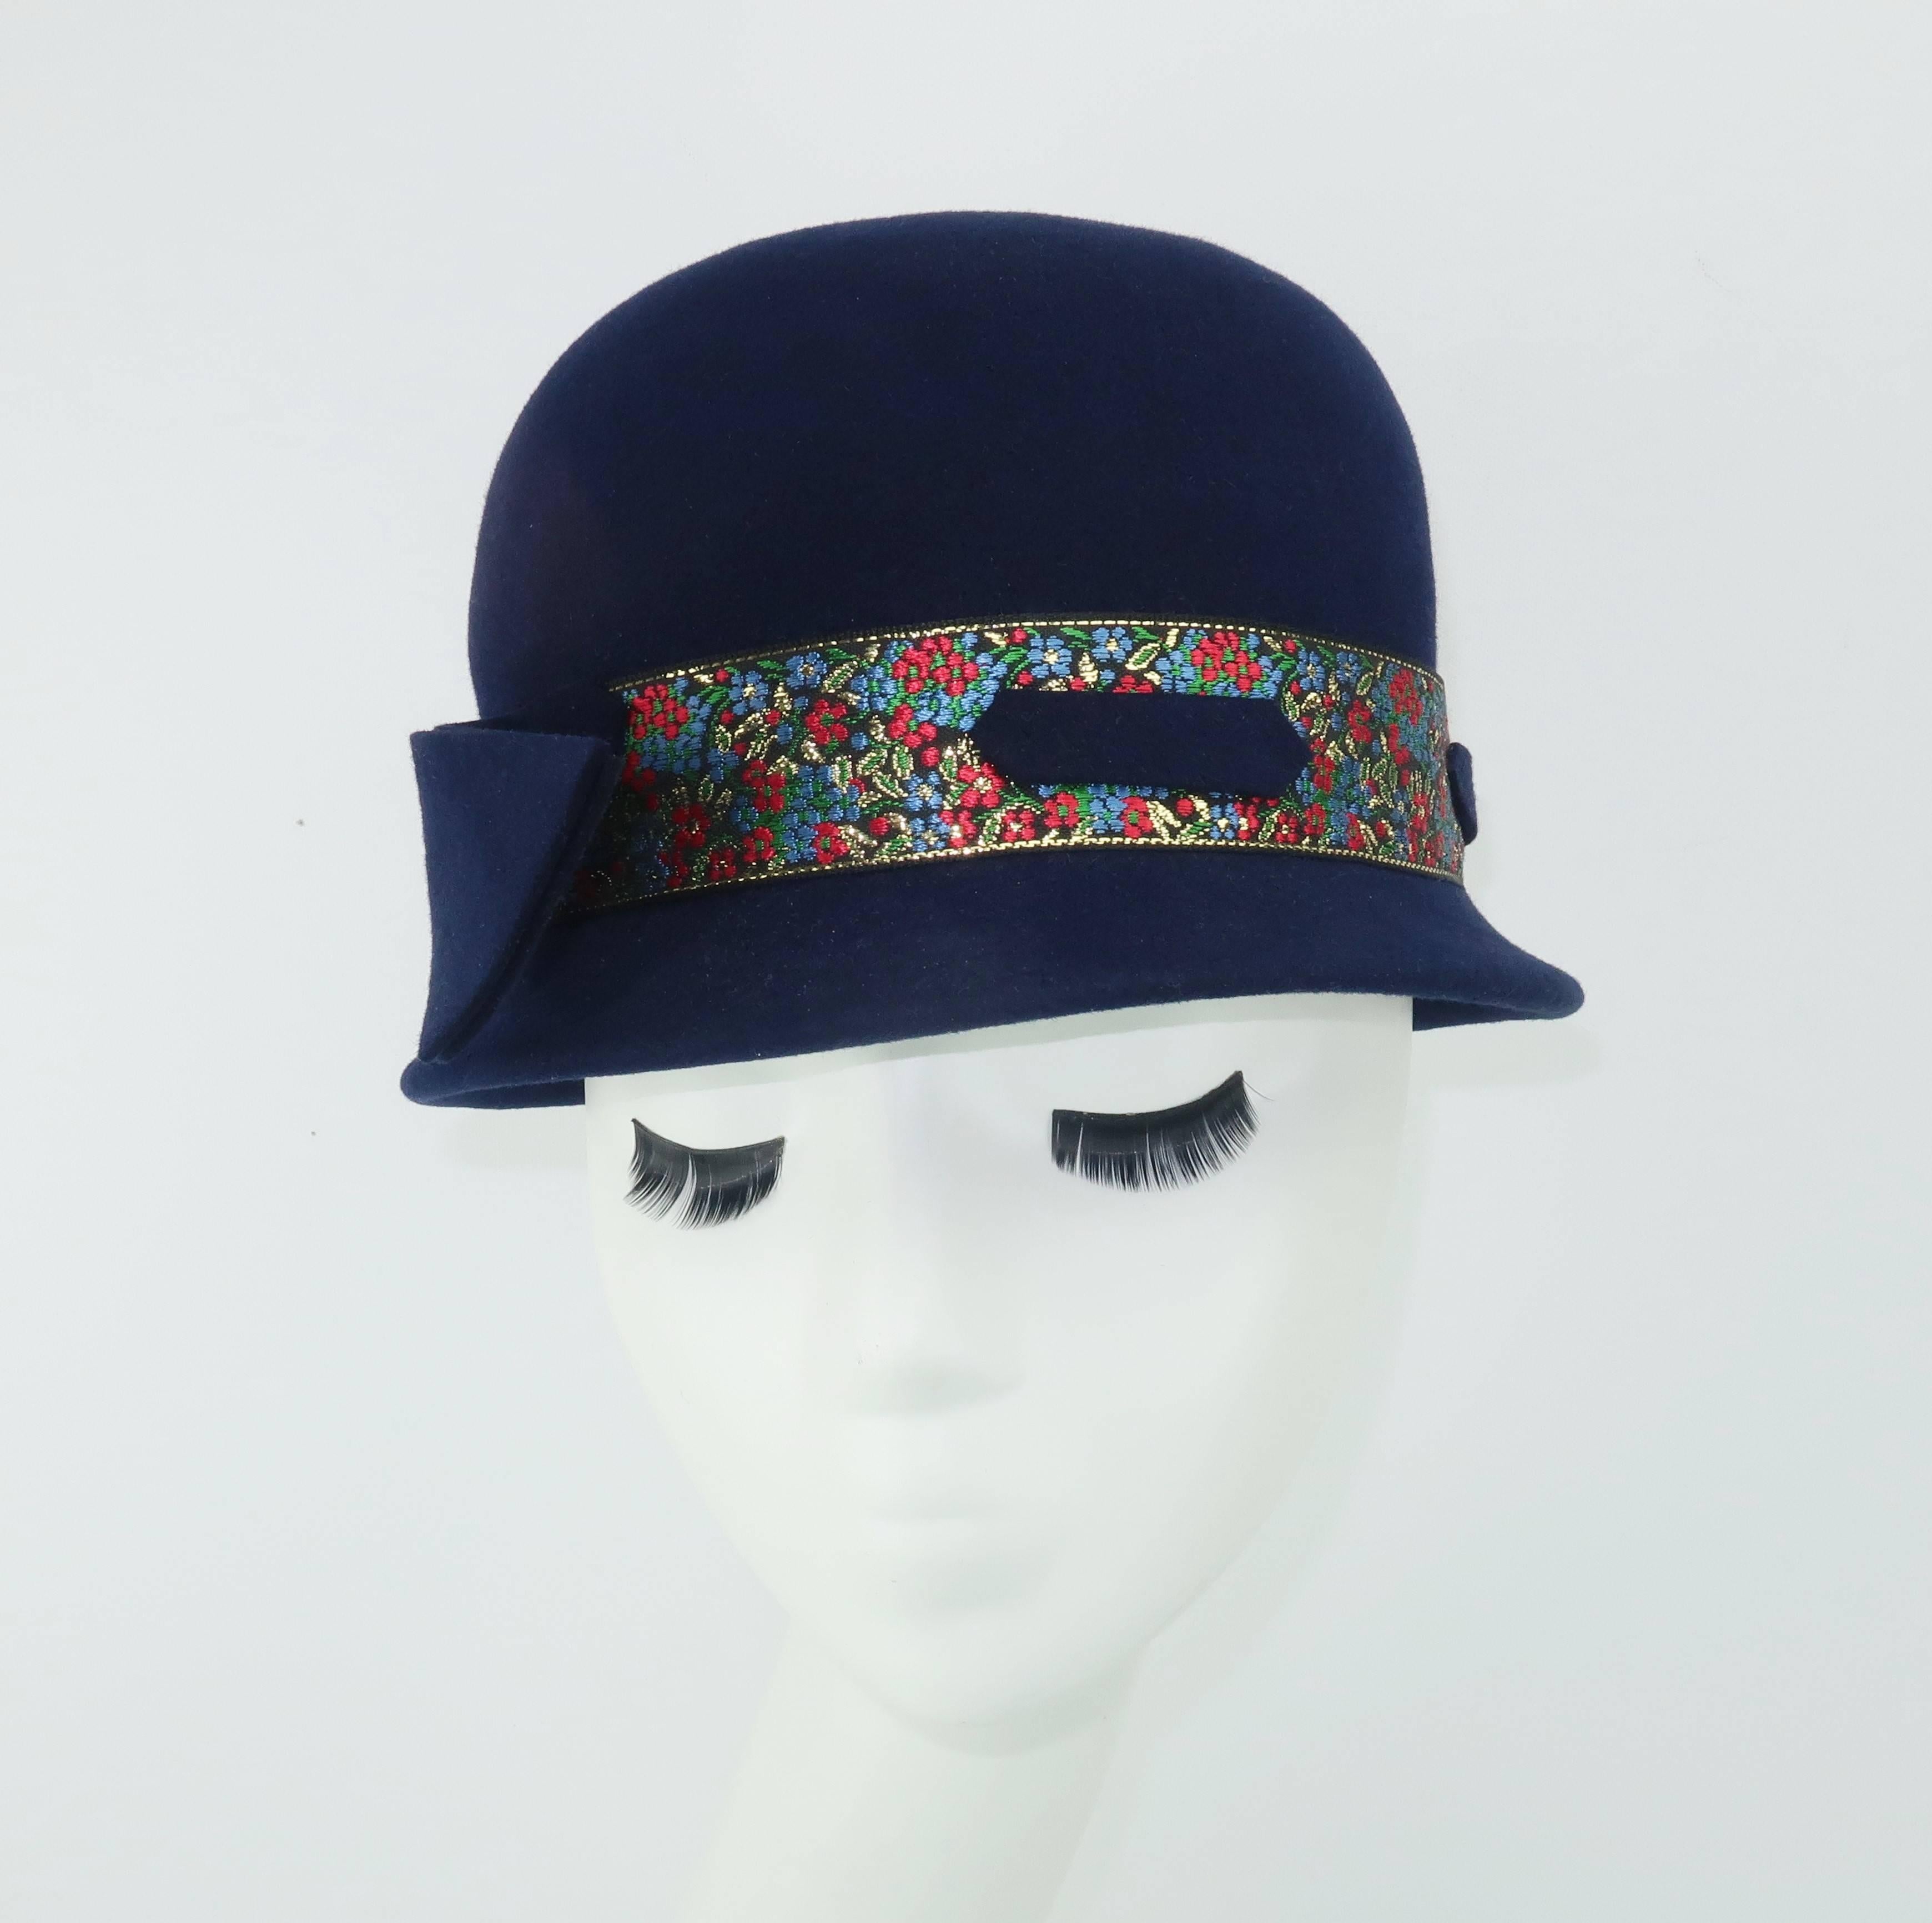 Give the classic bowler hat a ladylike twist and voila!  This adorable navy blue wool felt hat appears and provides a stylish topper that provides warmth and charm to a wintry ensemble.  The shallow brim is charmingly decorated with a floral brocade